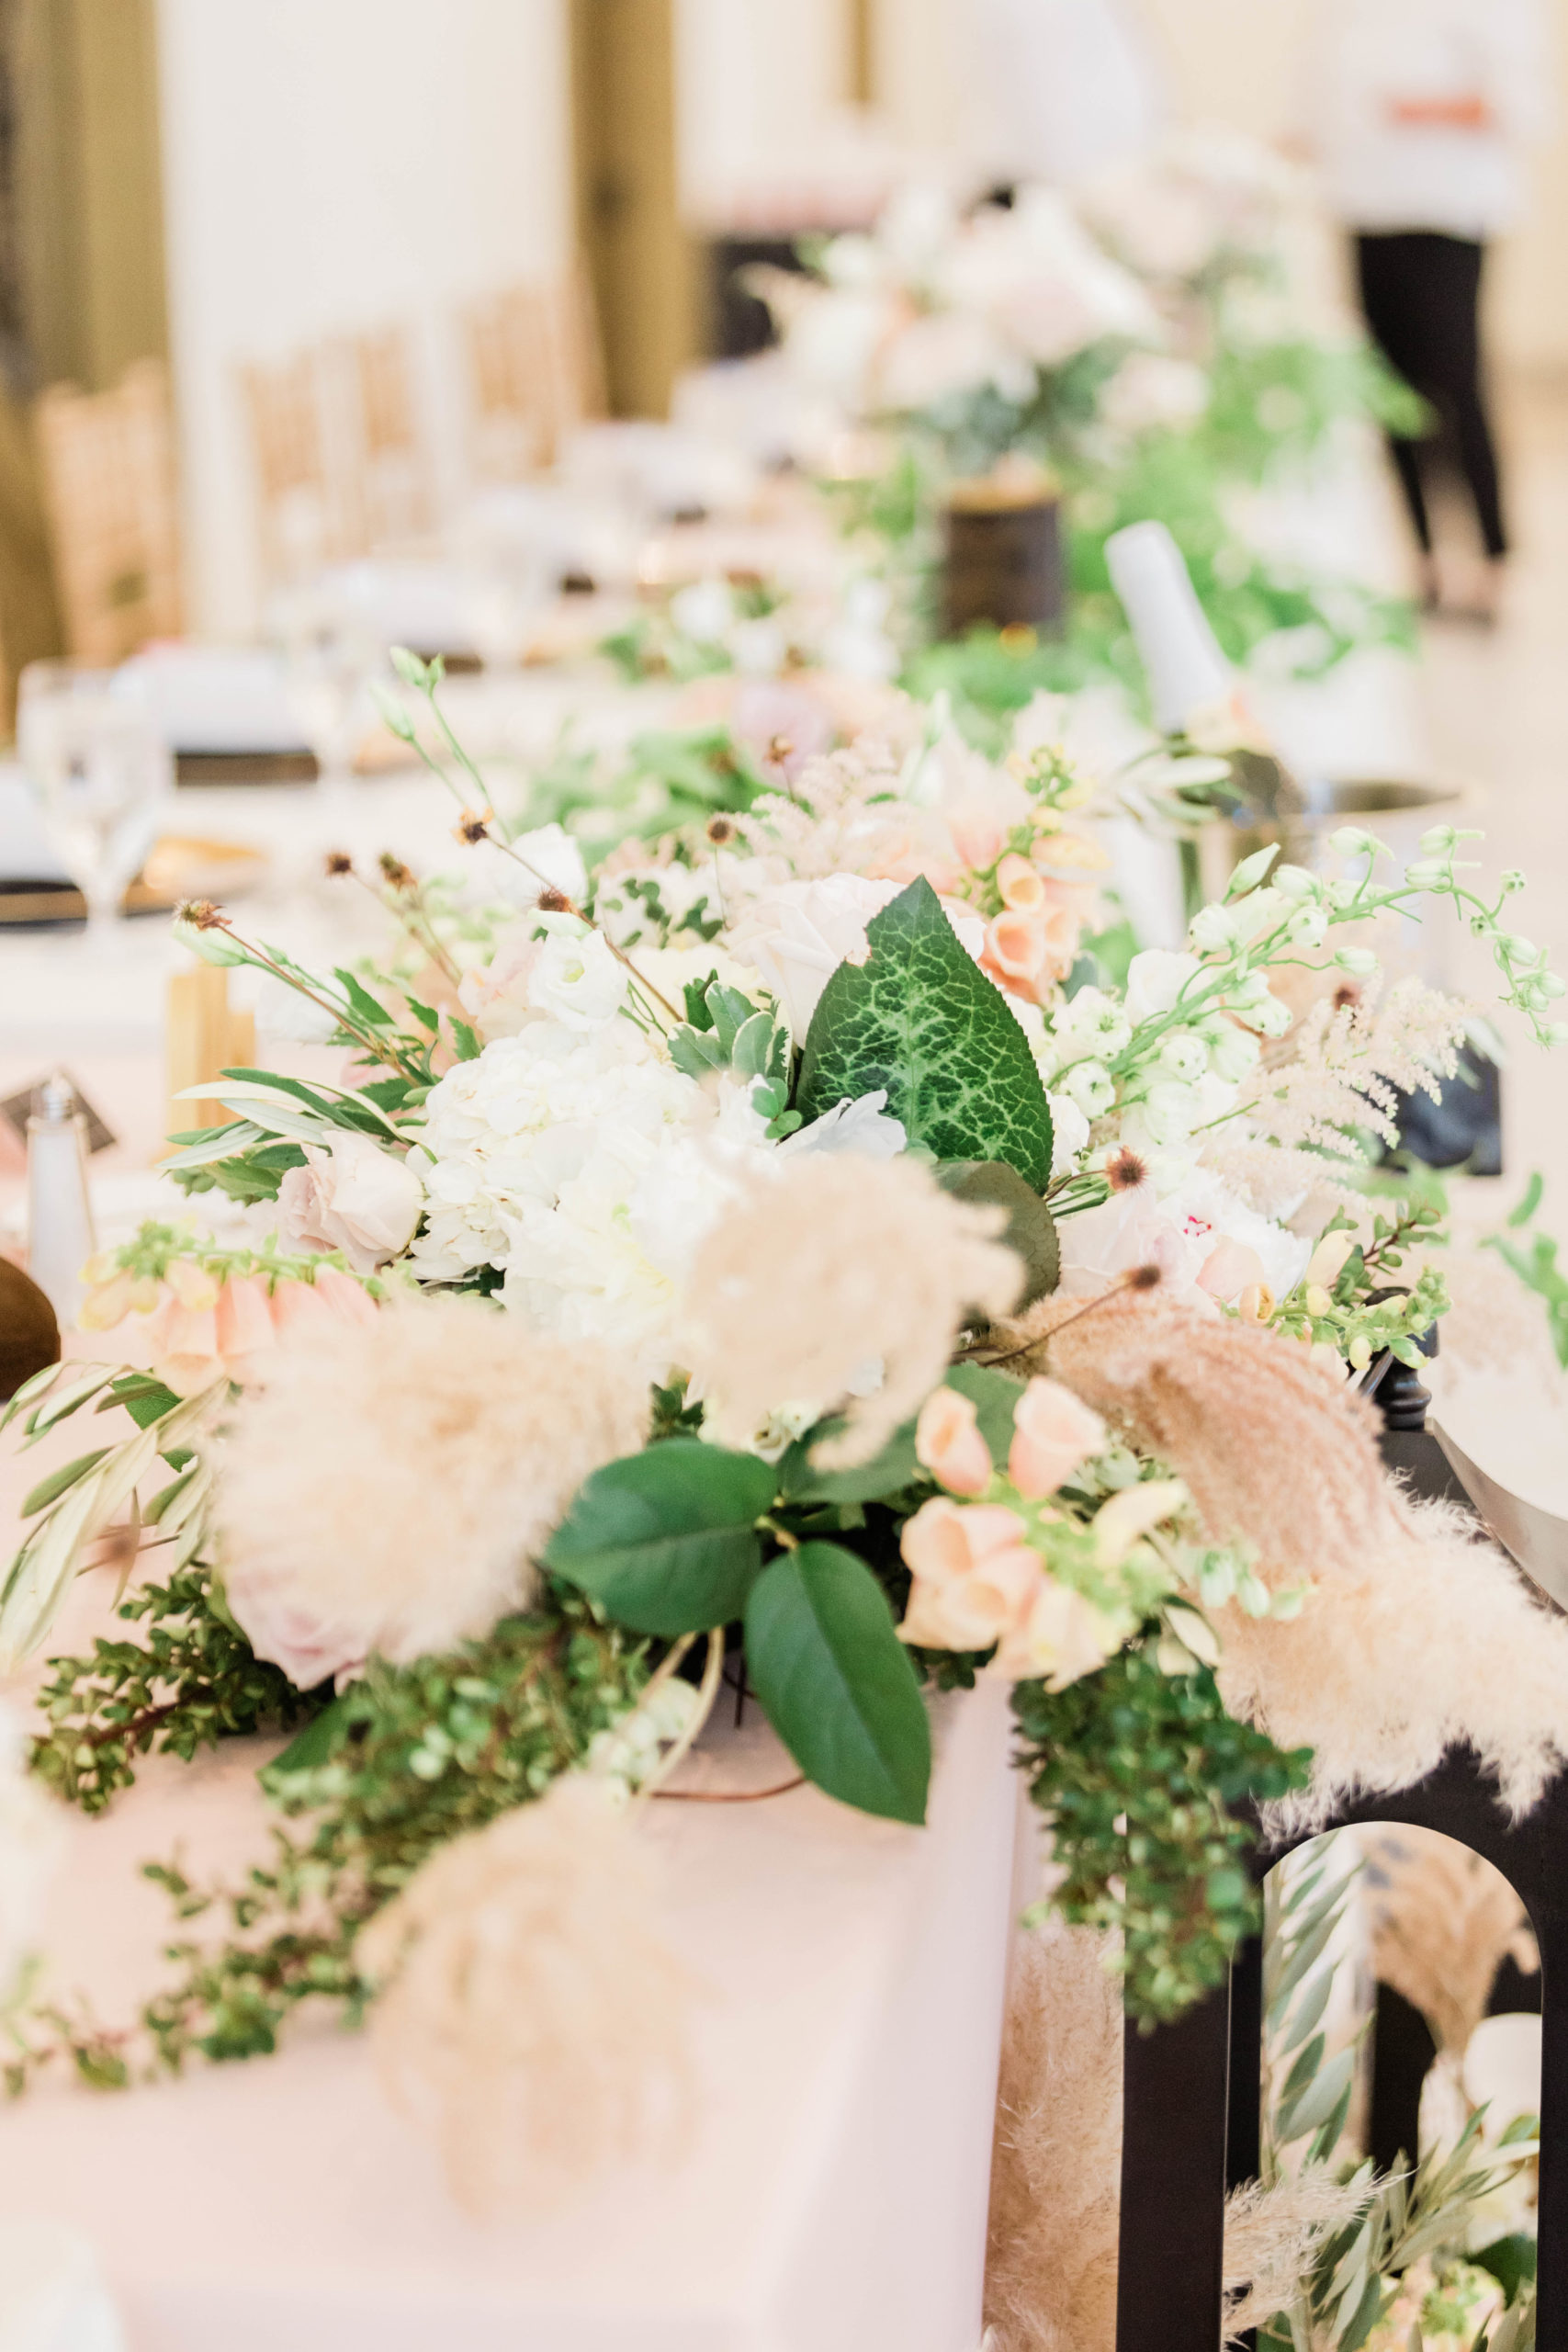 Boise Idaho wedding reception flowers acting as a centerpiece in the reception space with pink and cream florals